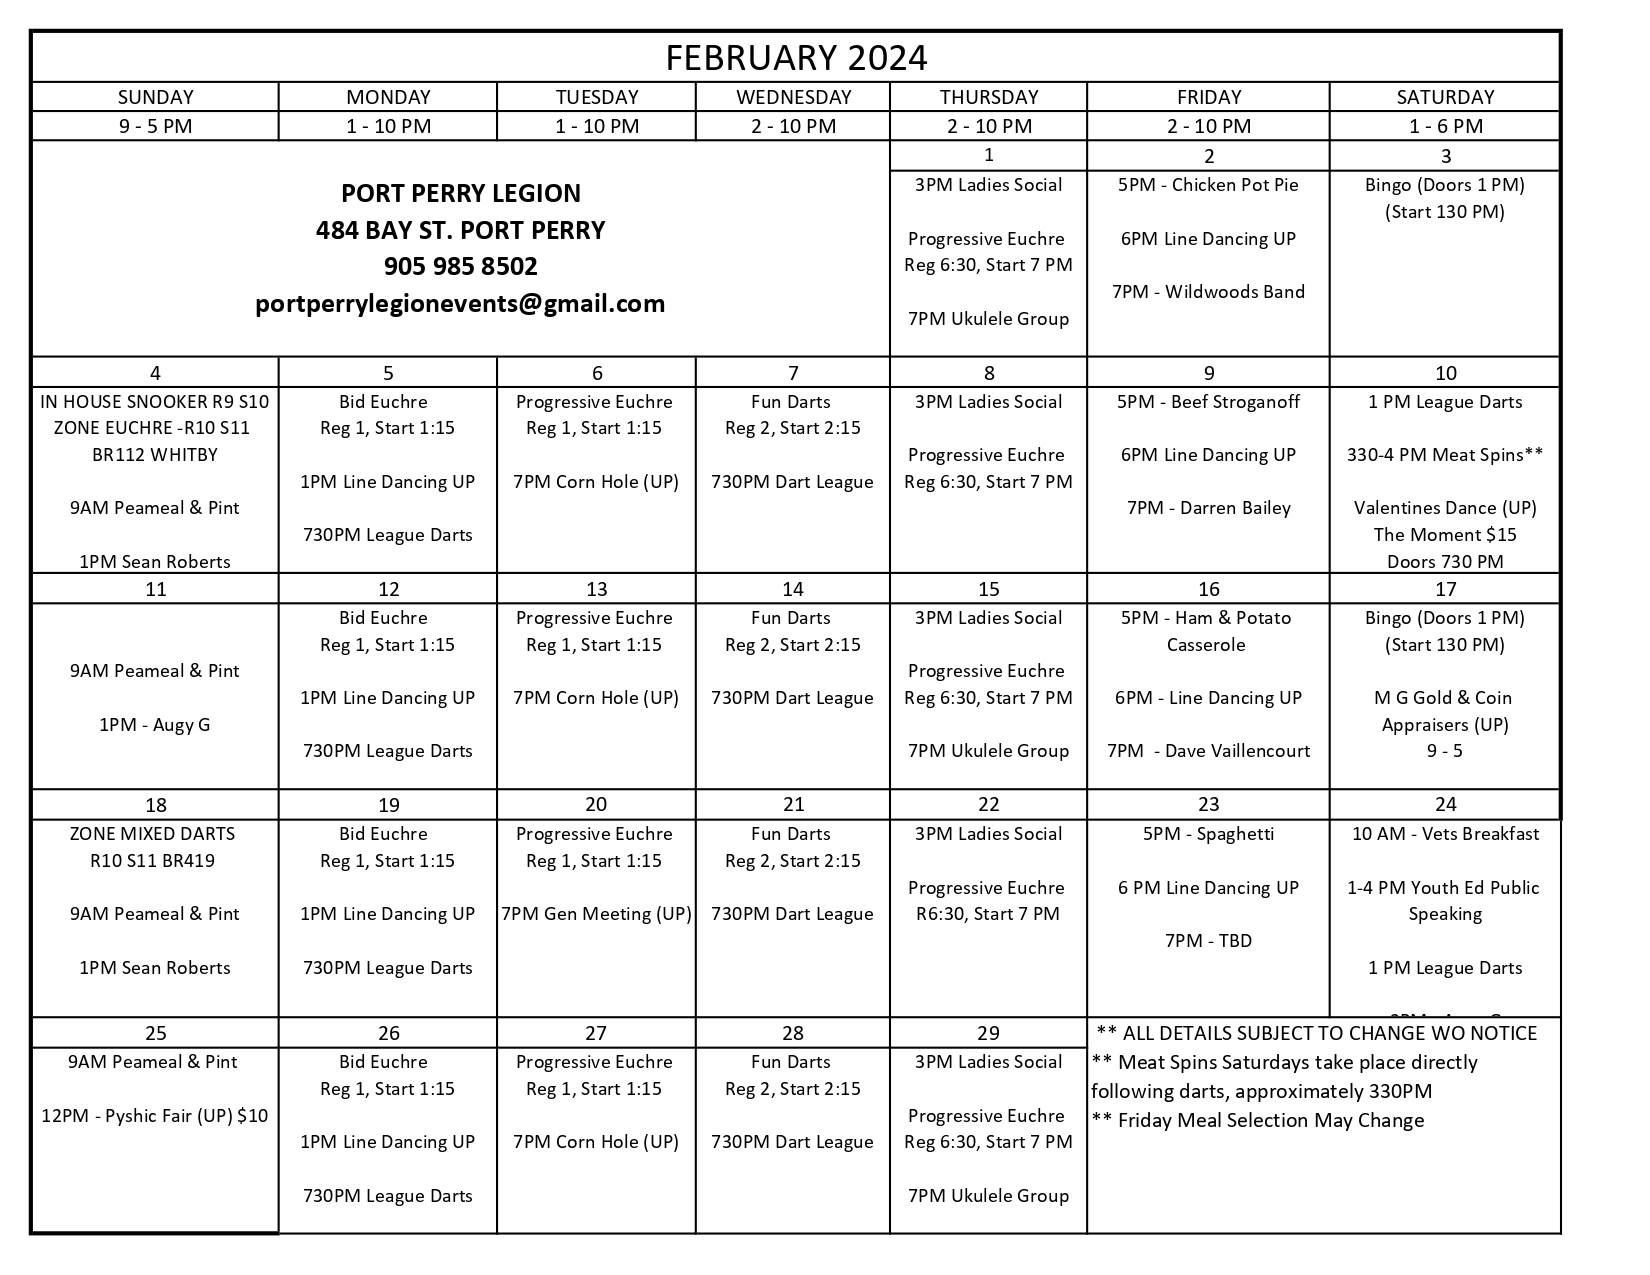 Port Perry Legion February Events